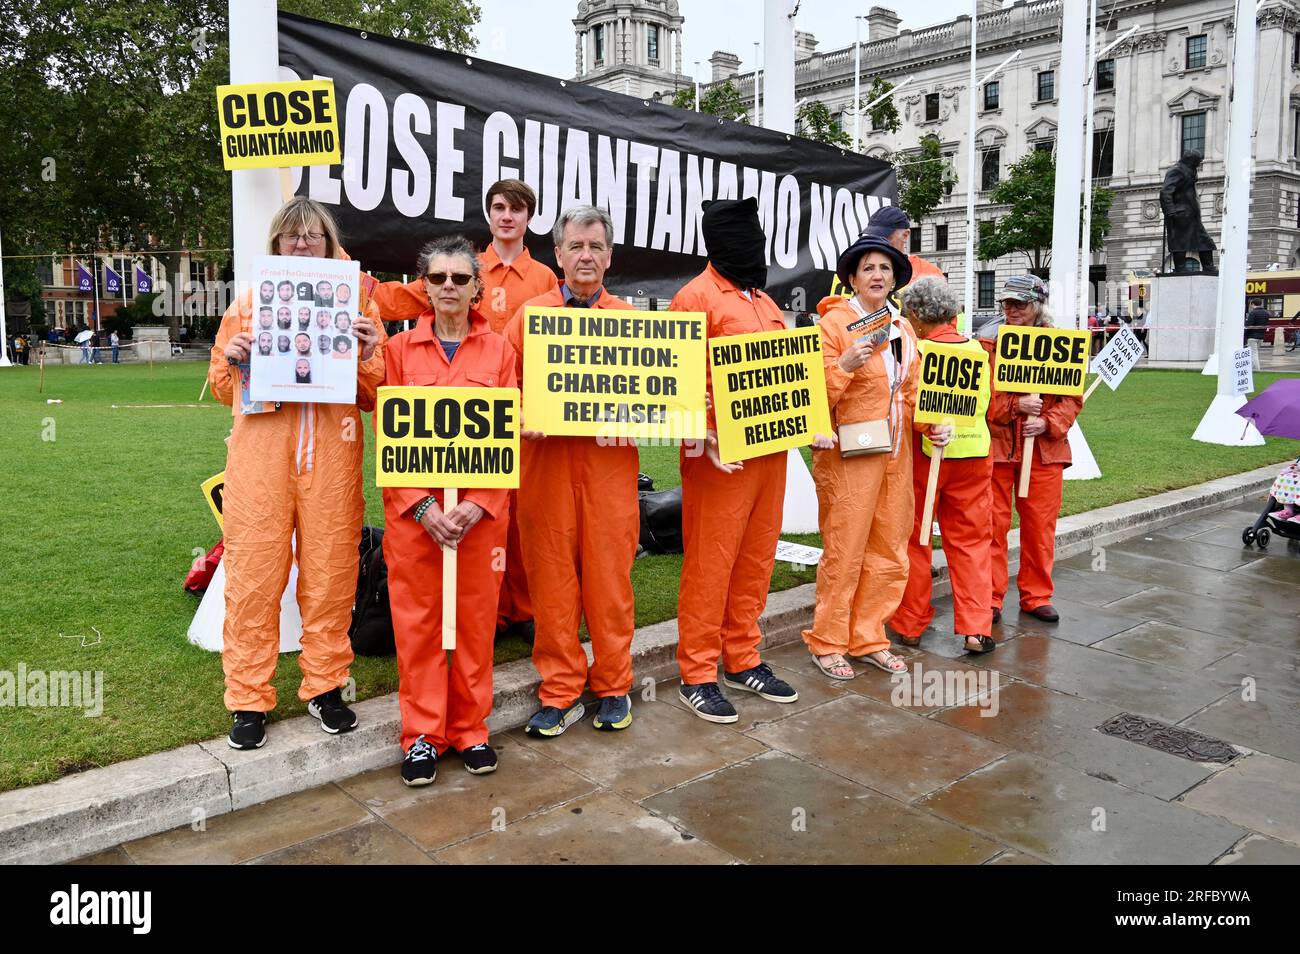 London, UK. Activists from the UK Guantanamo Network gathered opposite the Houses of Parliament to call for an end to 21 years of injustice and for the immediate closure of Guantanamo. Credit: michael melia/Alamy Live News Stock Photo